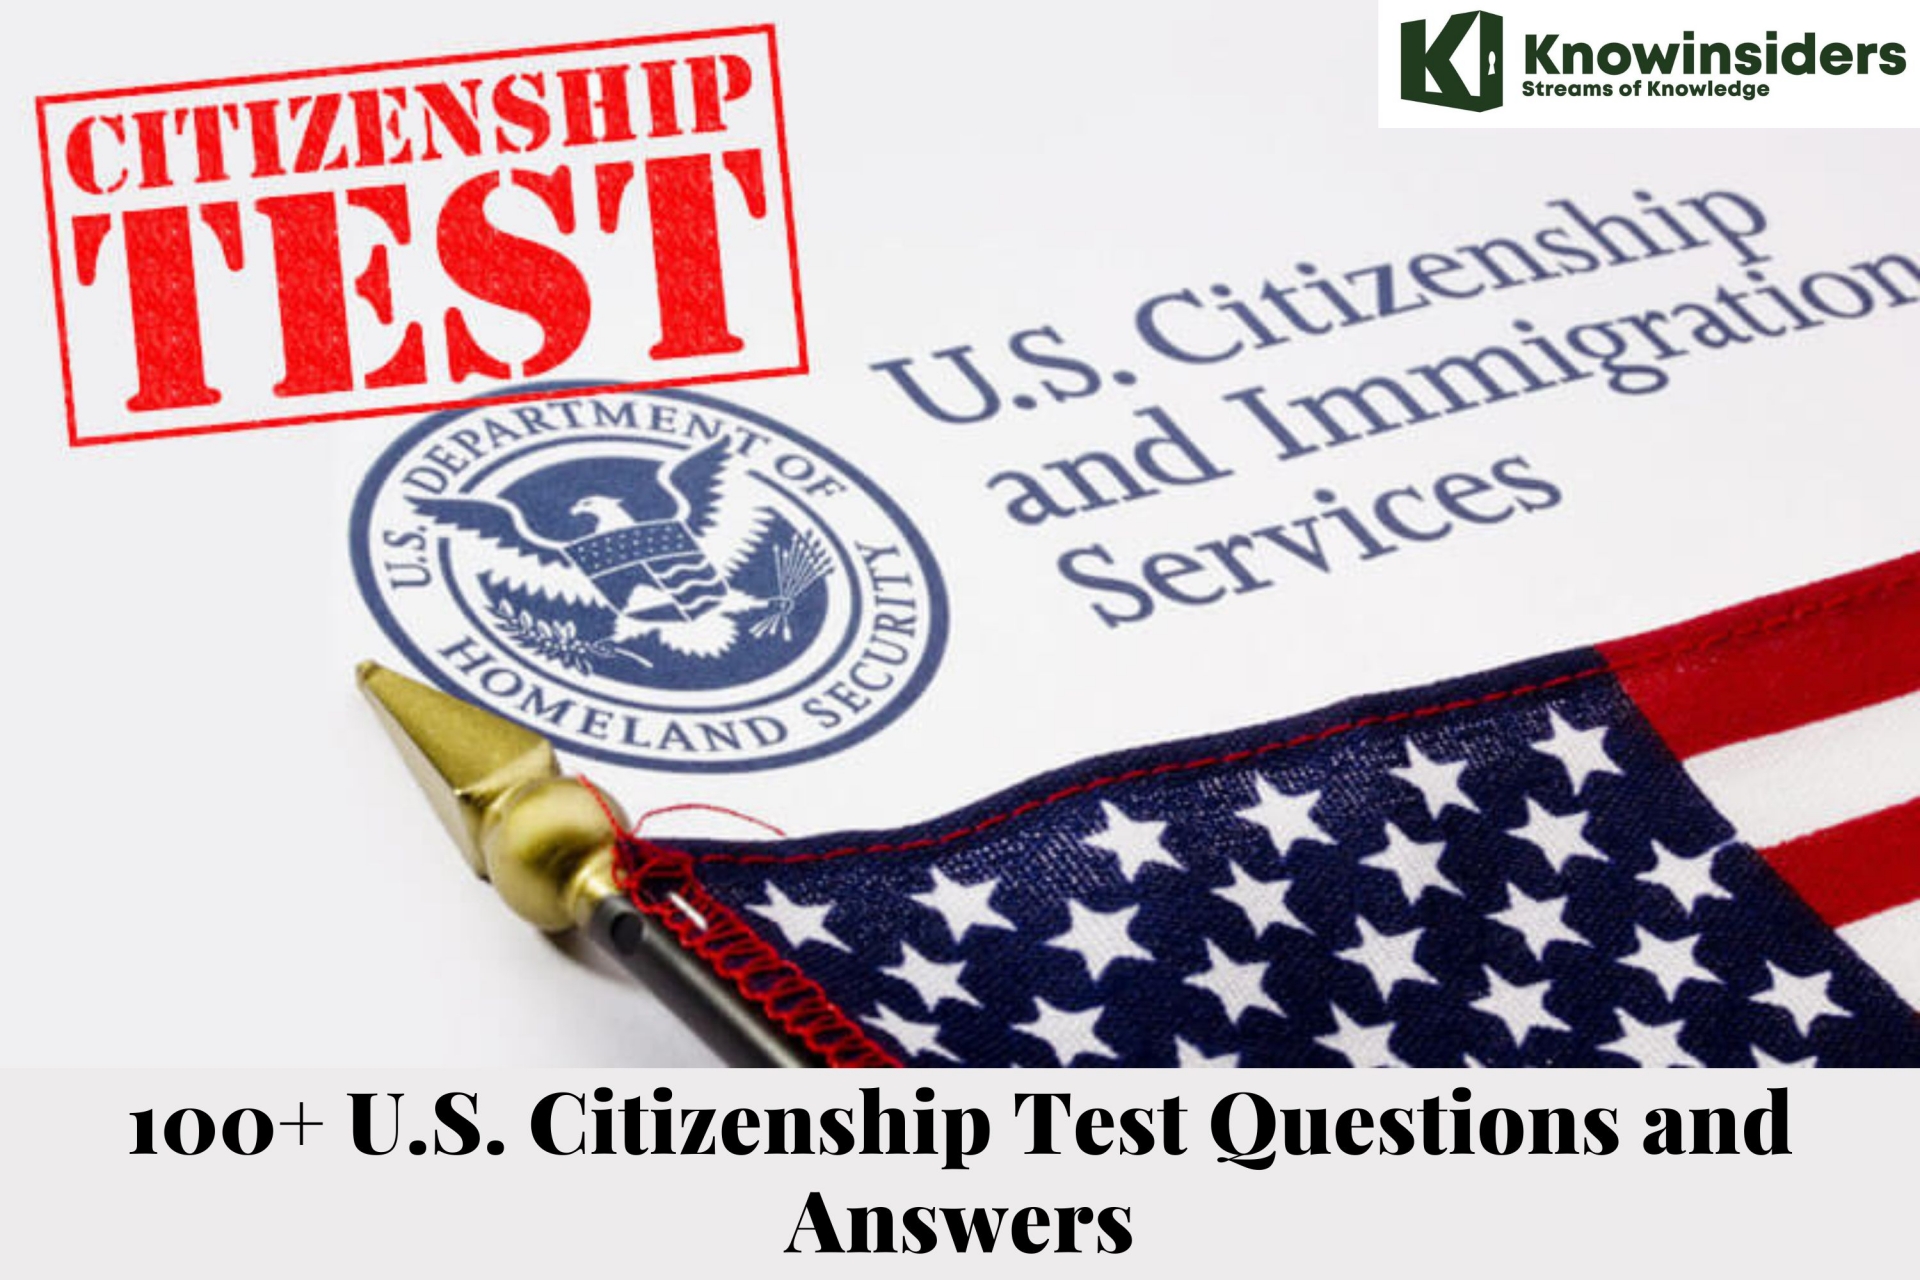 100+ U.S. Citizenship Test Questions and Answers